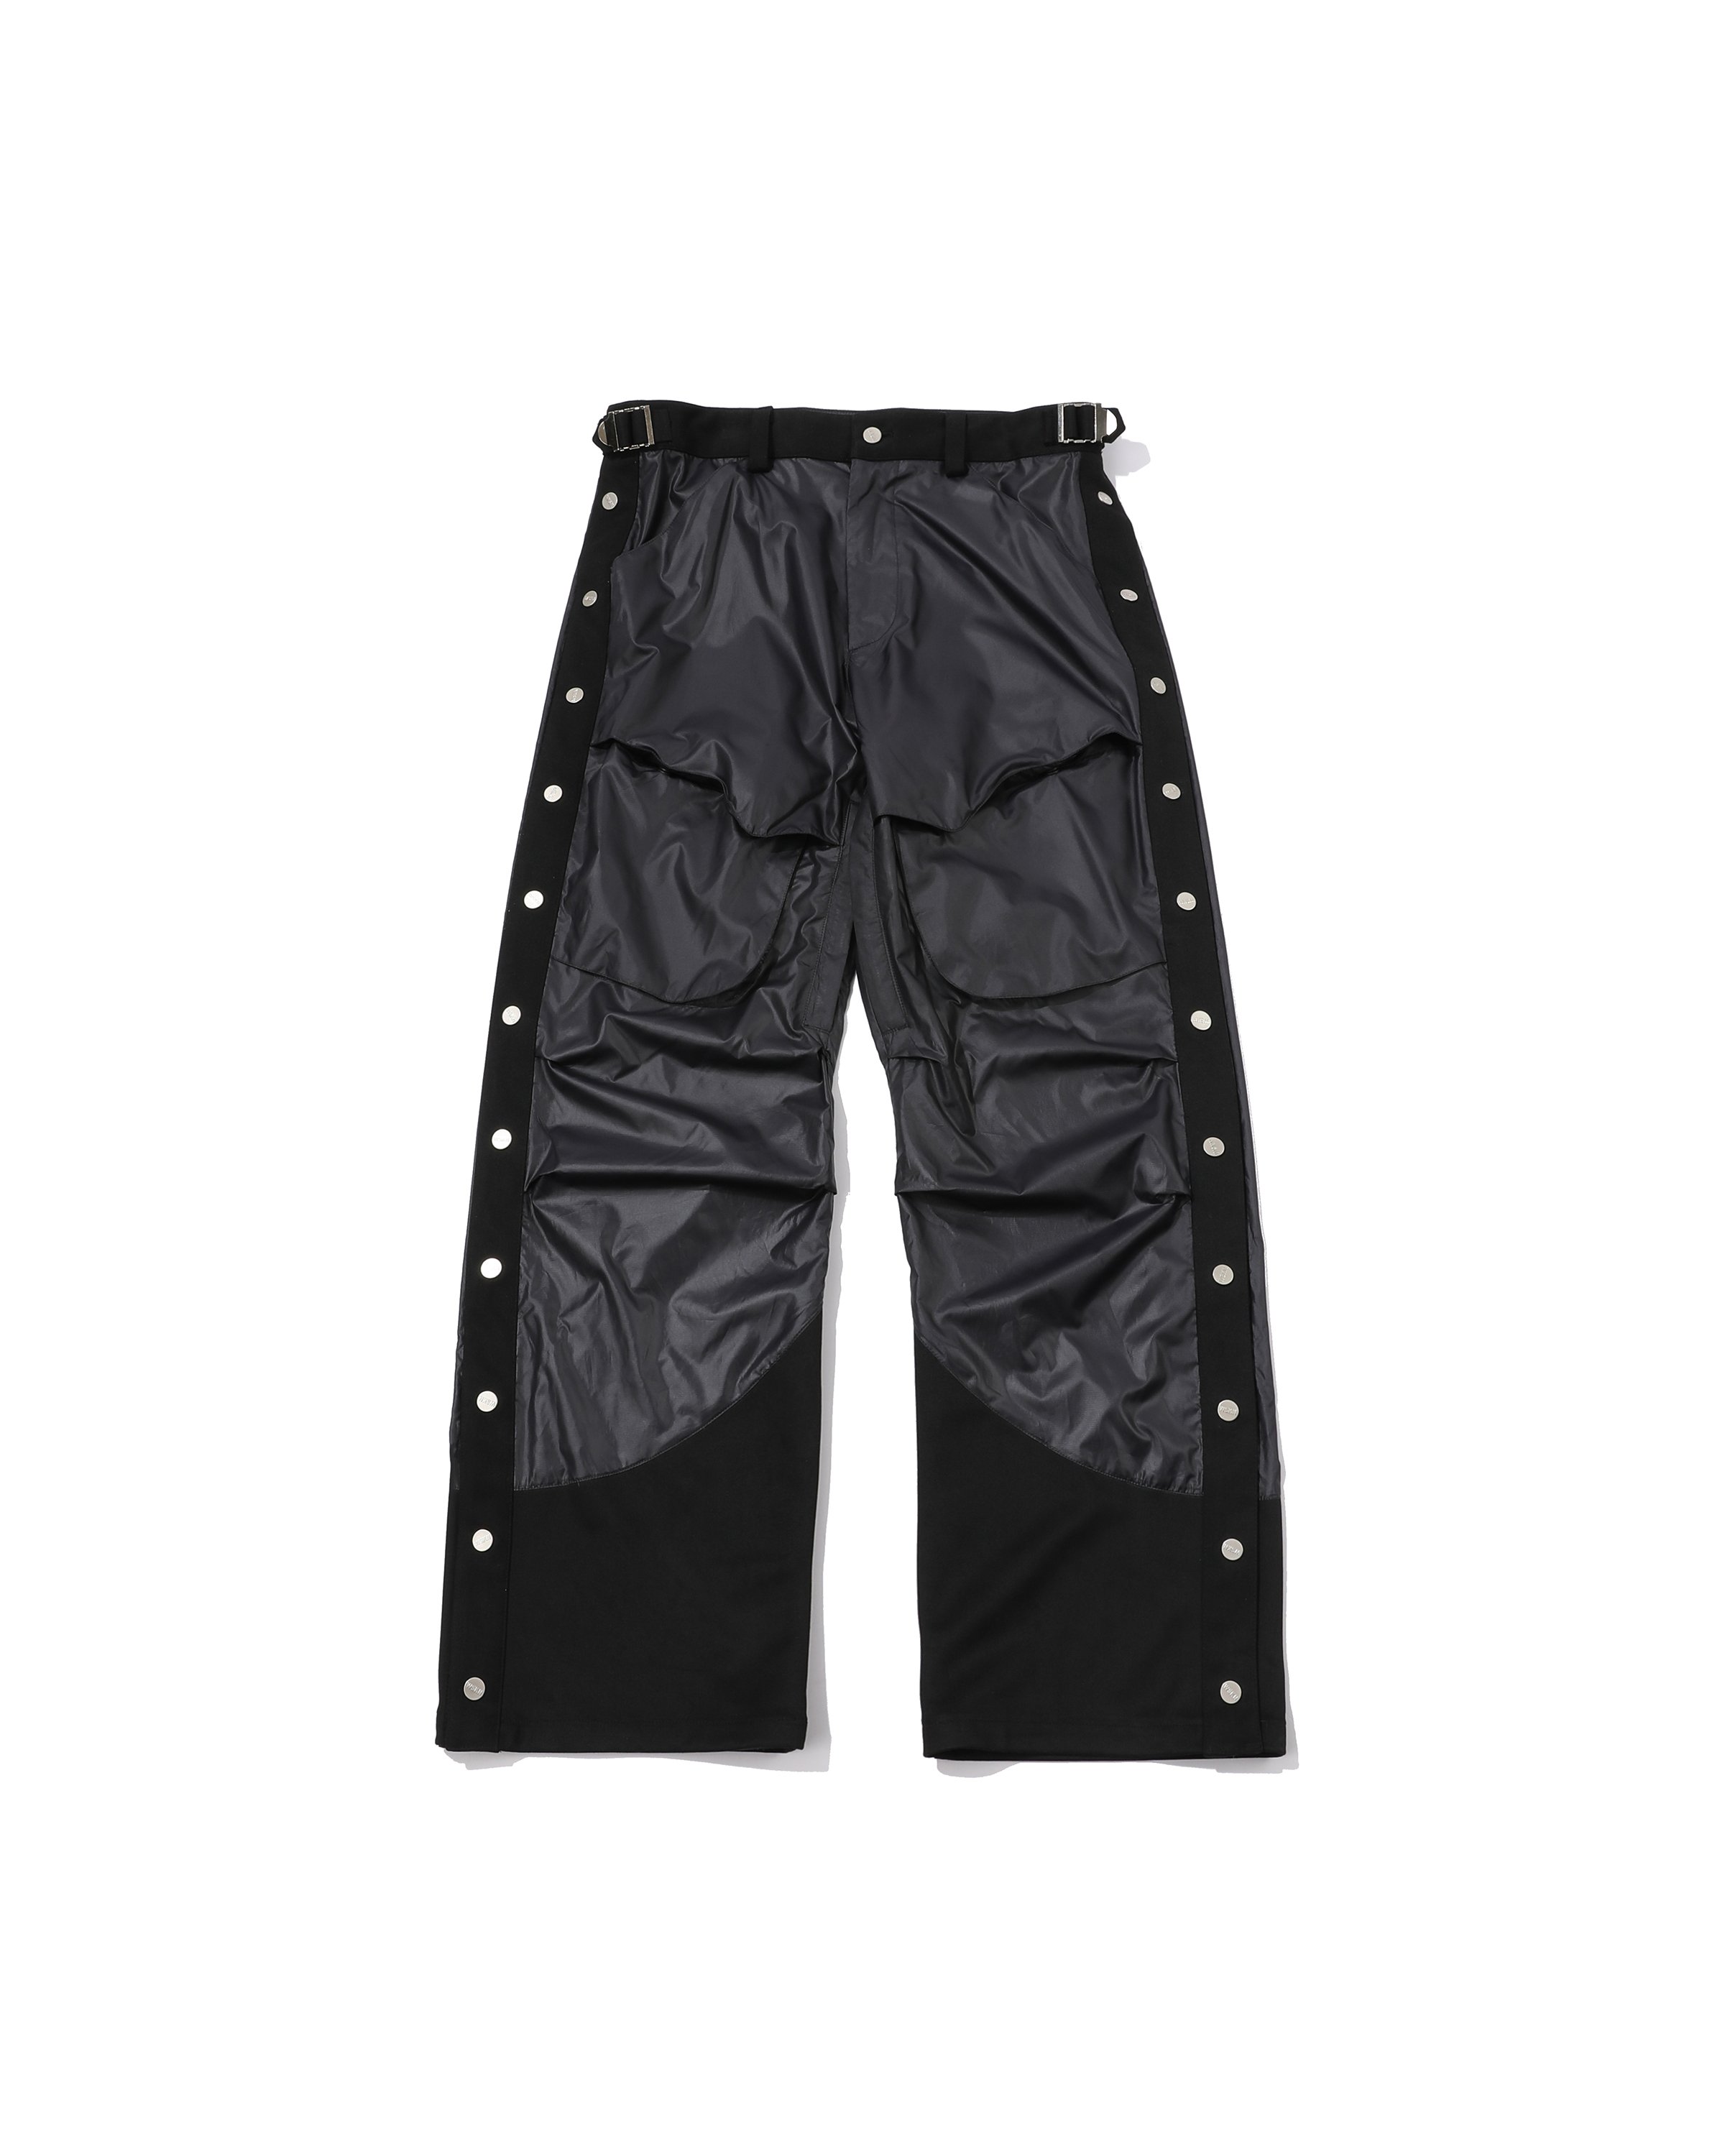 SUEDE STITCHED SIDE BUTTON PANTS(BLACK)